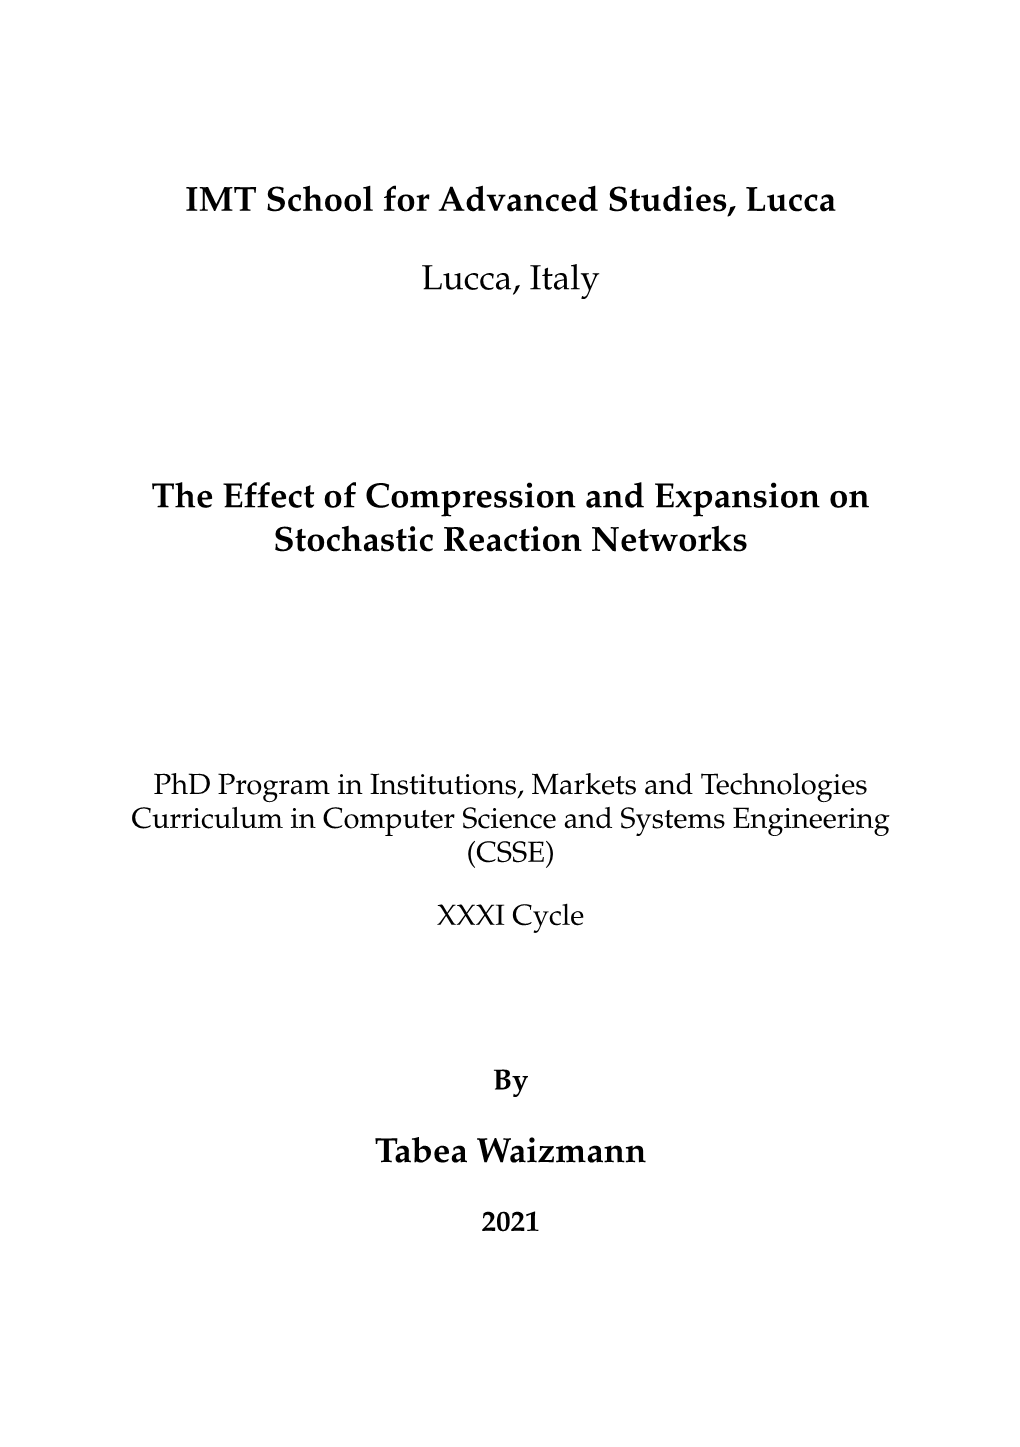 The Effect of Compression and Expansion on Stochastic Reaction Networks